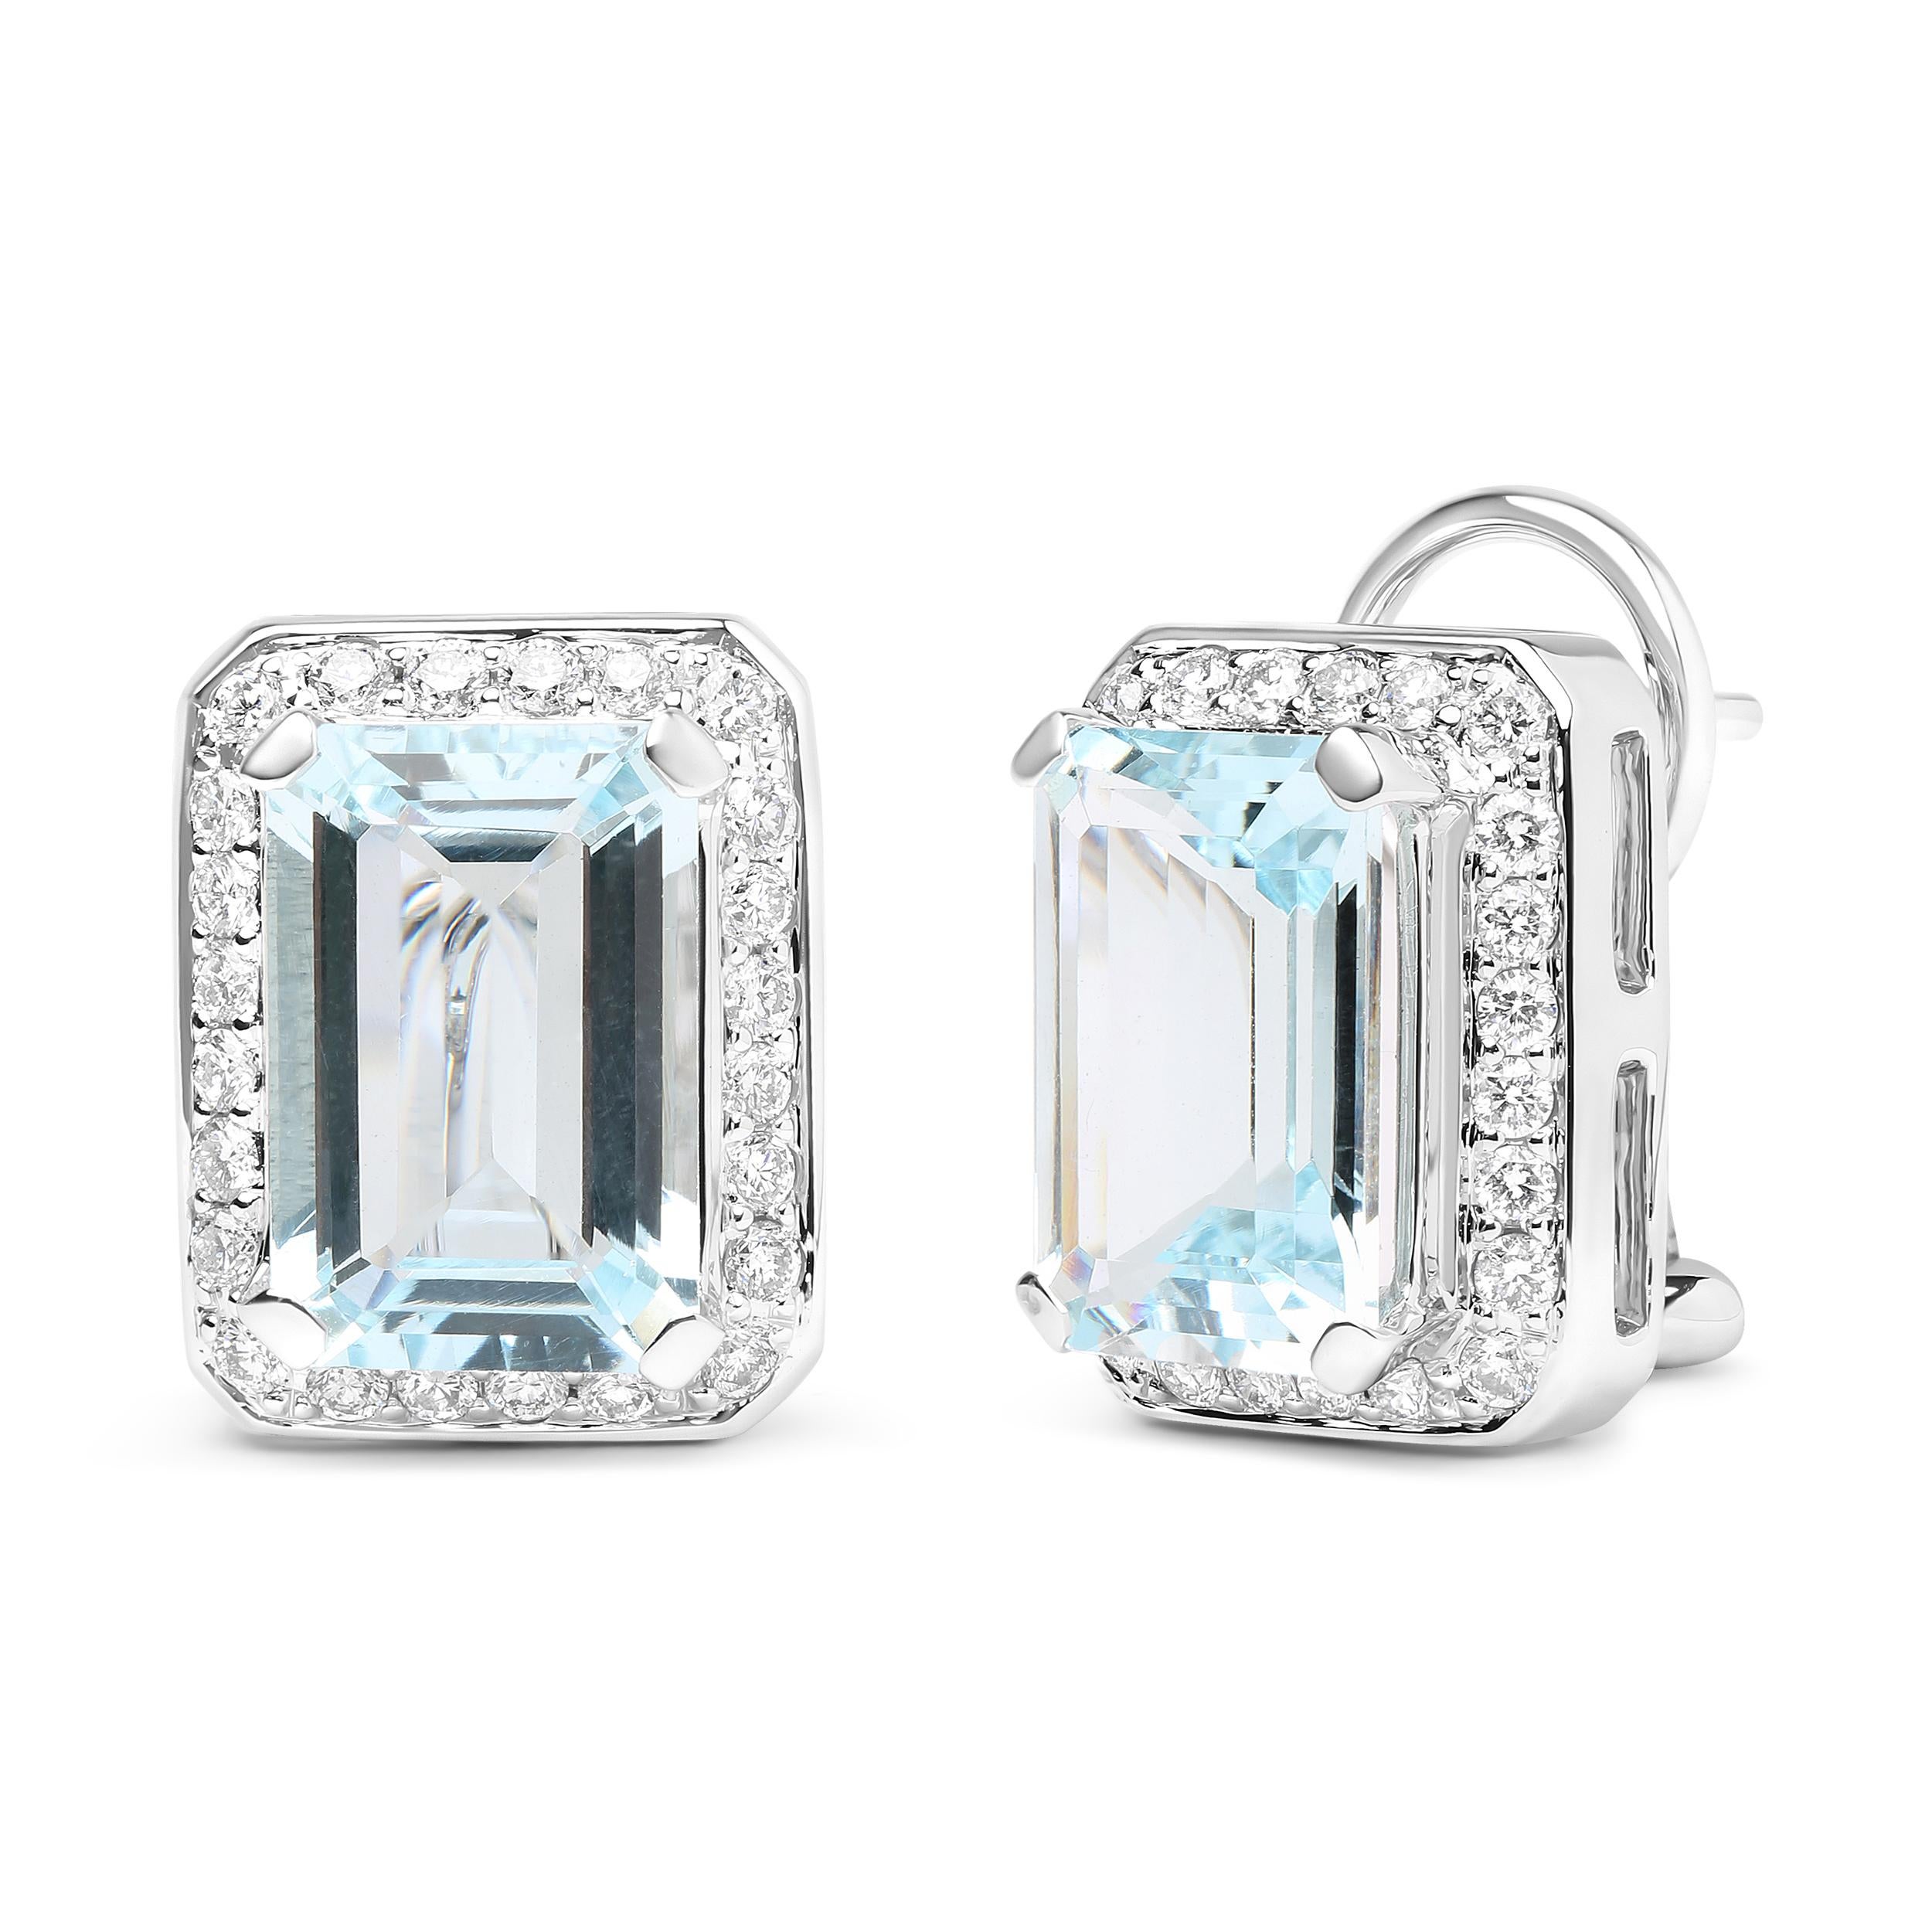 Budding with grace and elegance, these stud earrings bring a feminine energy crafted from genuine 18k white gold with natural gemstones and diamonds in a regal motif. At the center of each earring is a stately 13x9mm emerald-cut, heat-treated blue